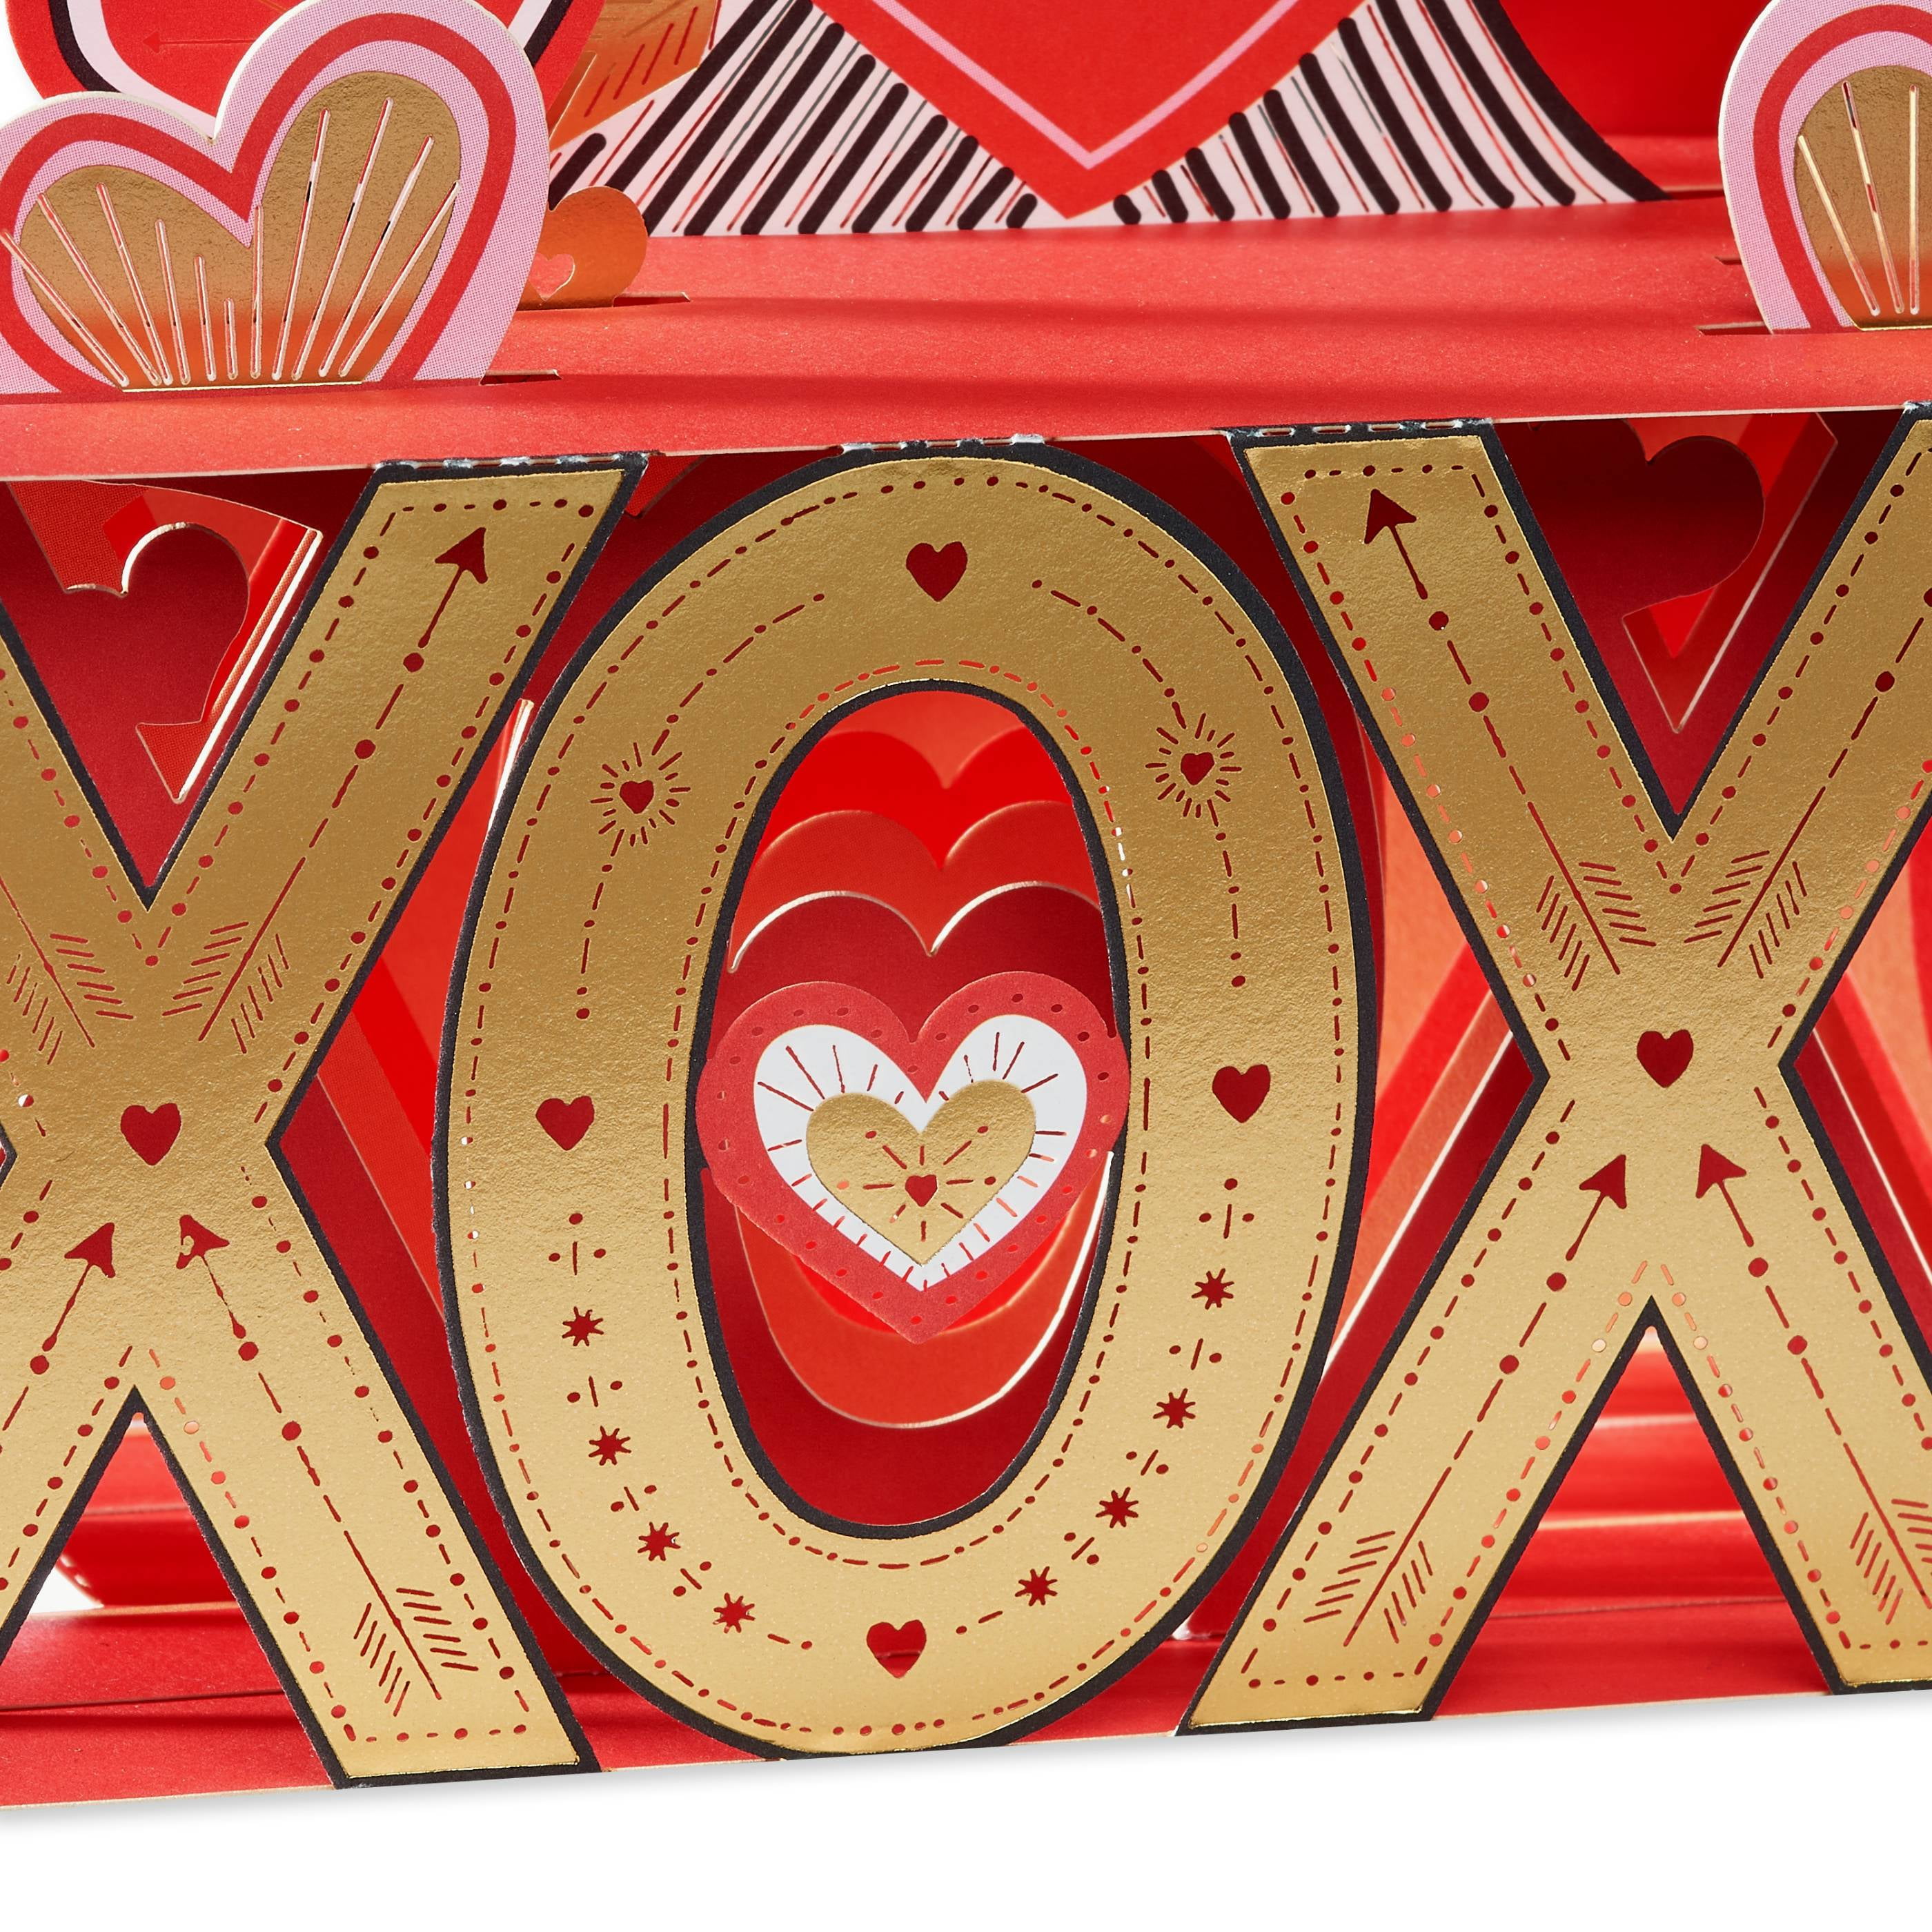 American Greetings Valentines Day Tissue Paper XO Hugs Kisses 3 Packs for  sale online